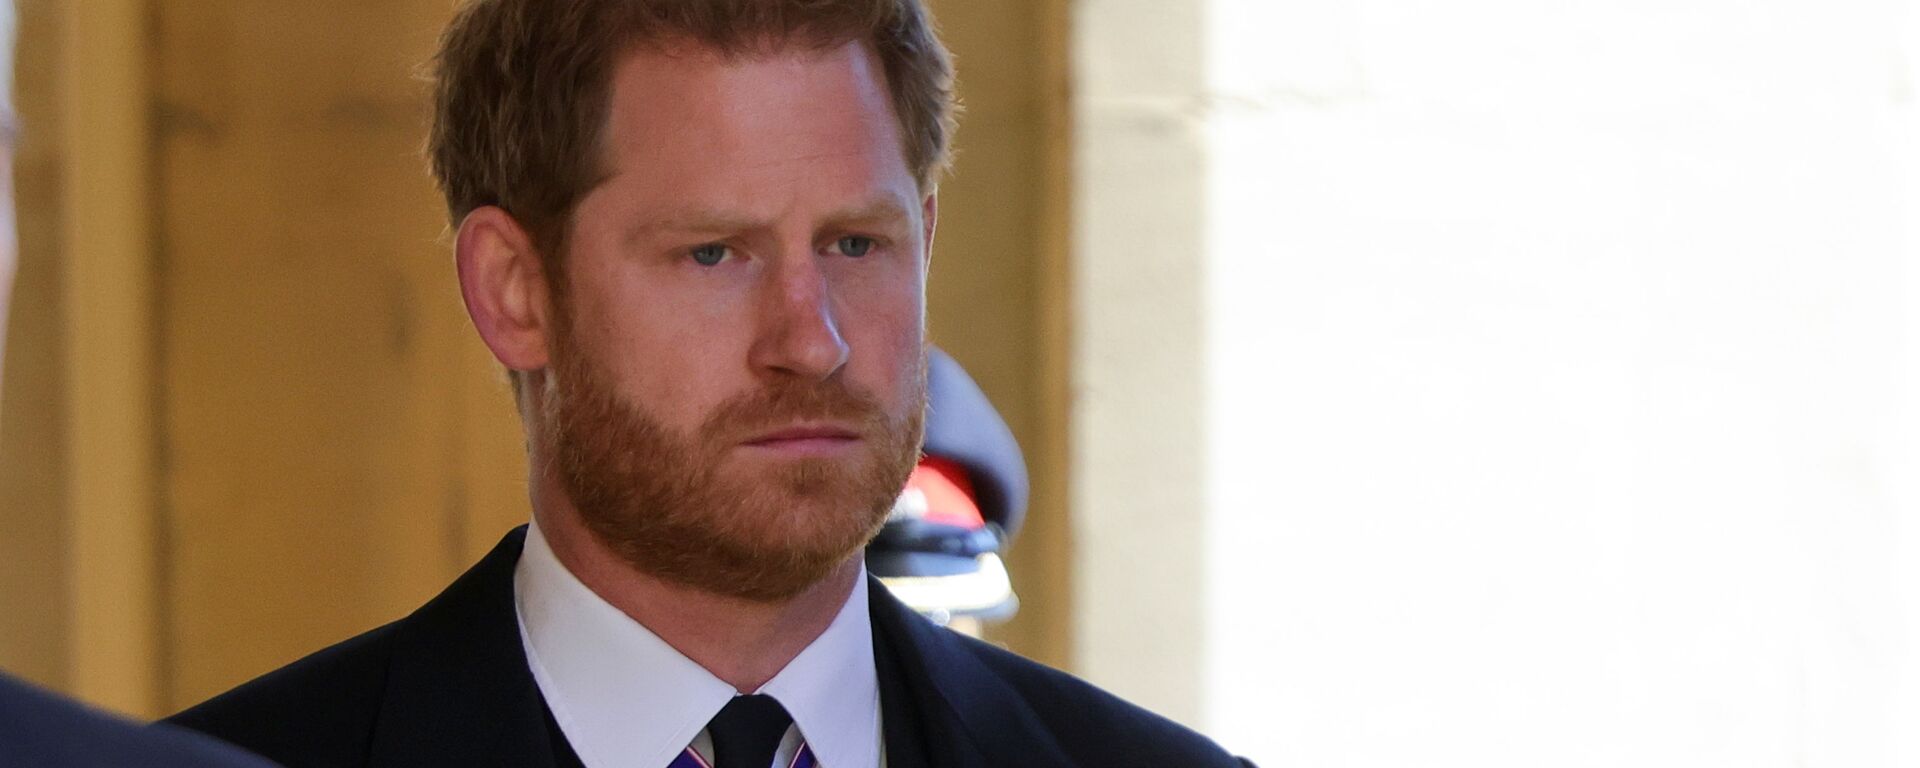 Britain's Prince Harry, Duke of Sussex looks on as he attends the funeral of Britain's Prince Philip, husband of Queen Elizabeth, who died at the age of 99, in Windsor, Britain, April 17, 2021 - Sputnik International, 1920, 22.05.2021